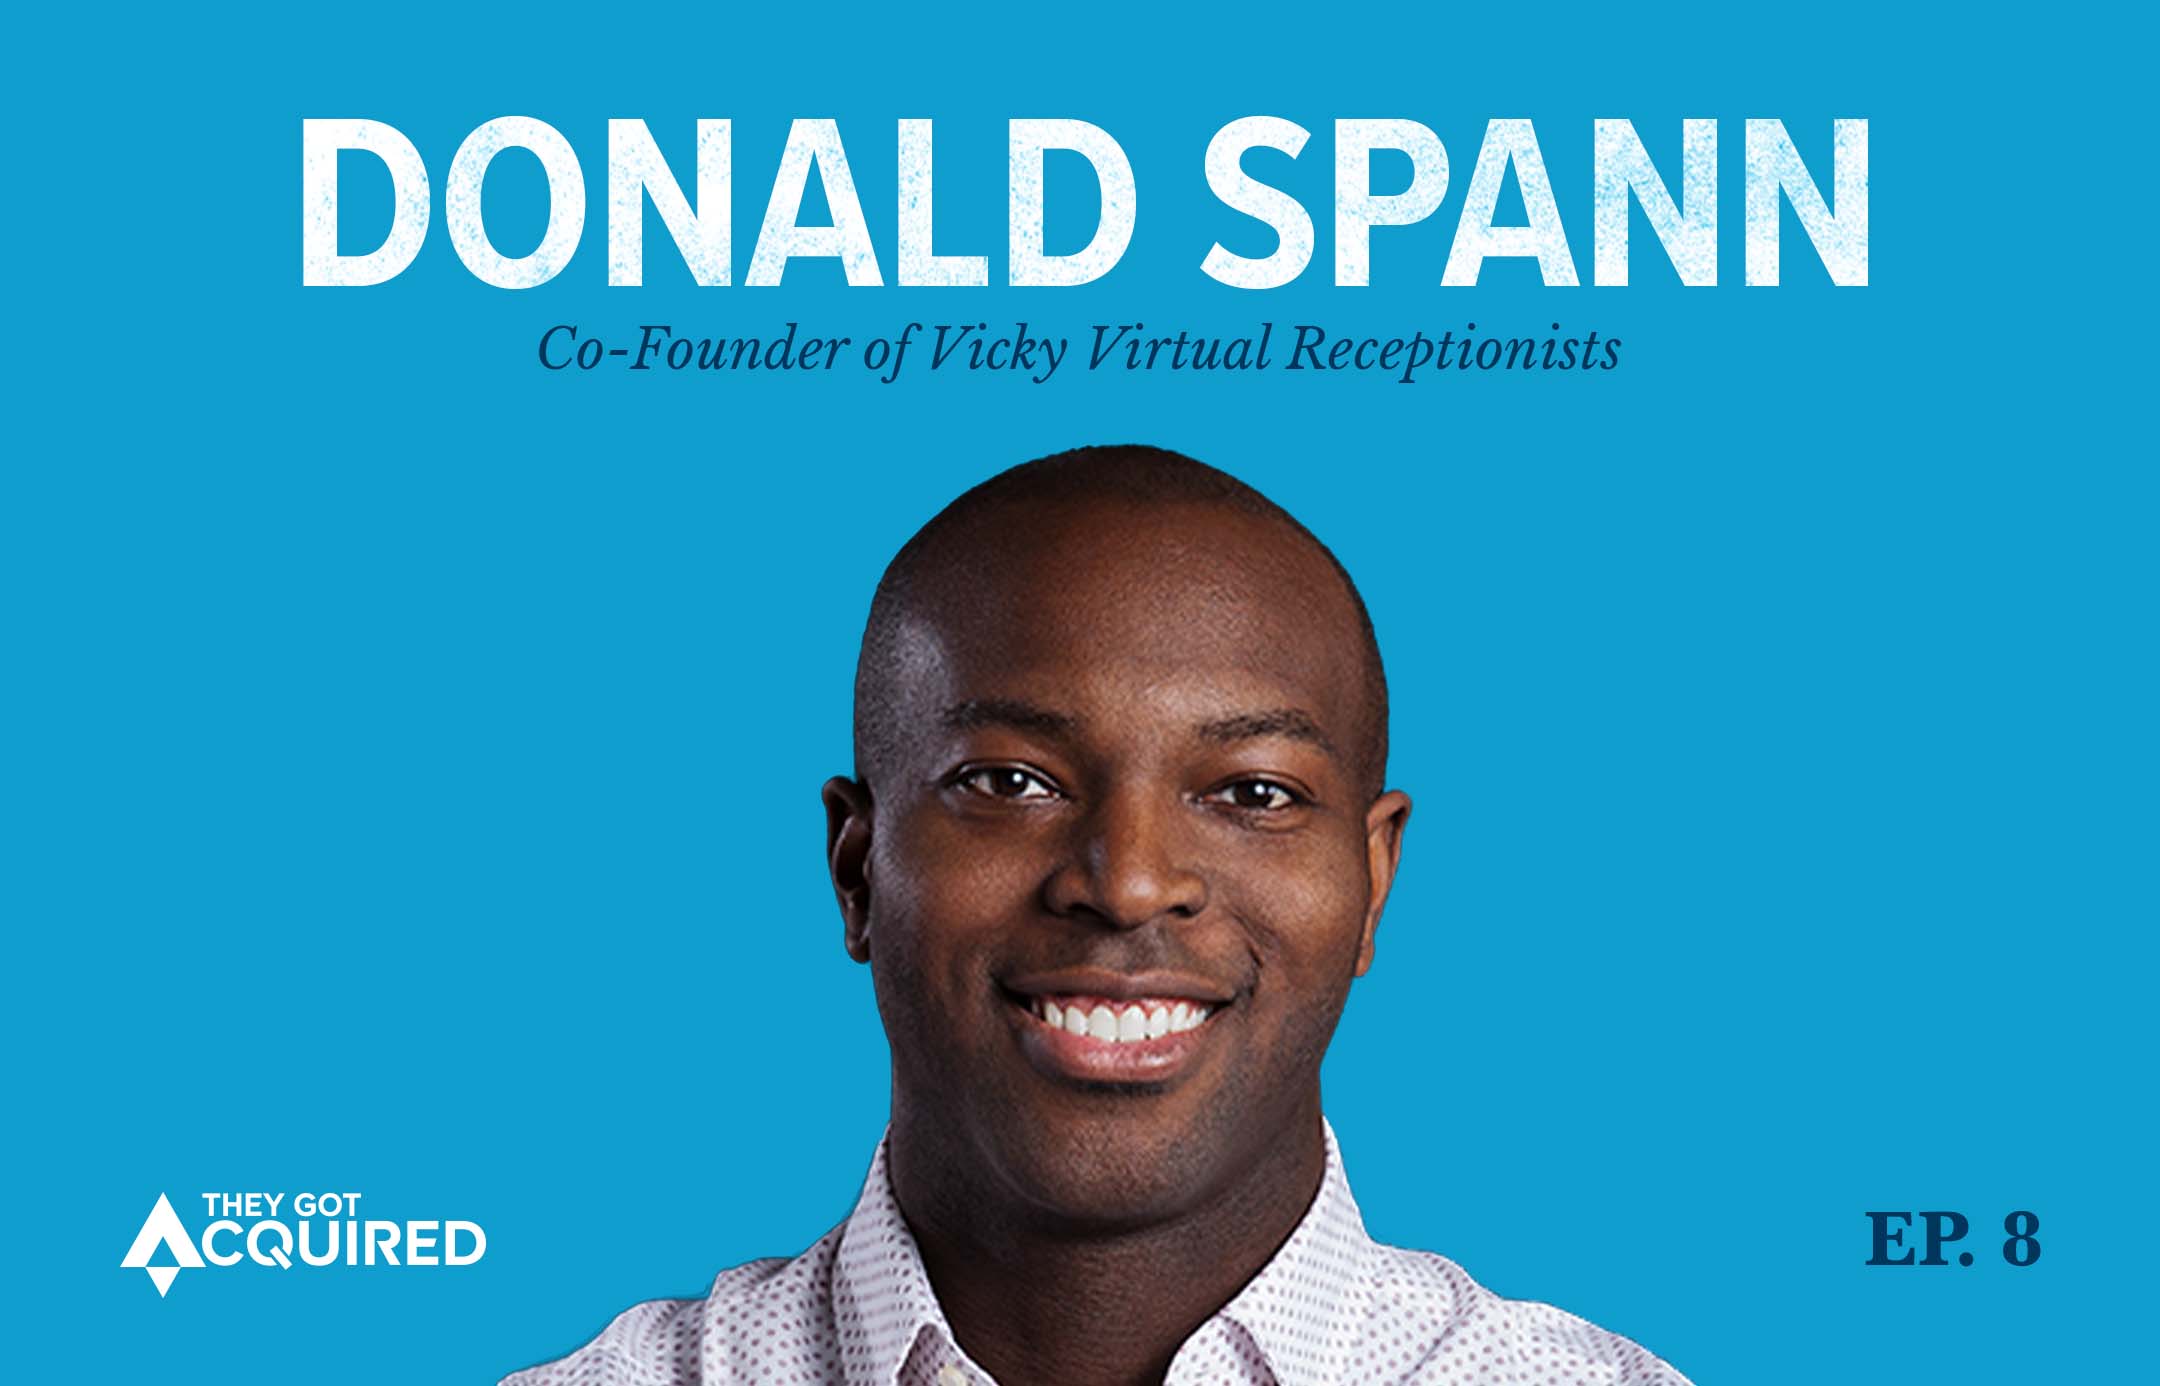 Donald Spann, Co-Founder of Vicky Virtual Receptionists